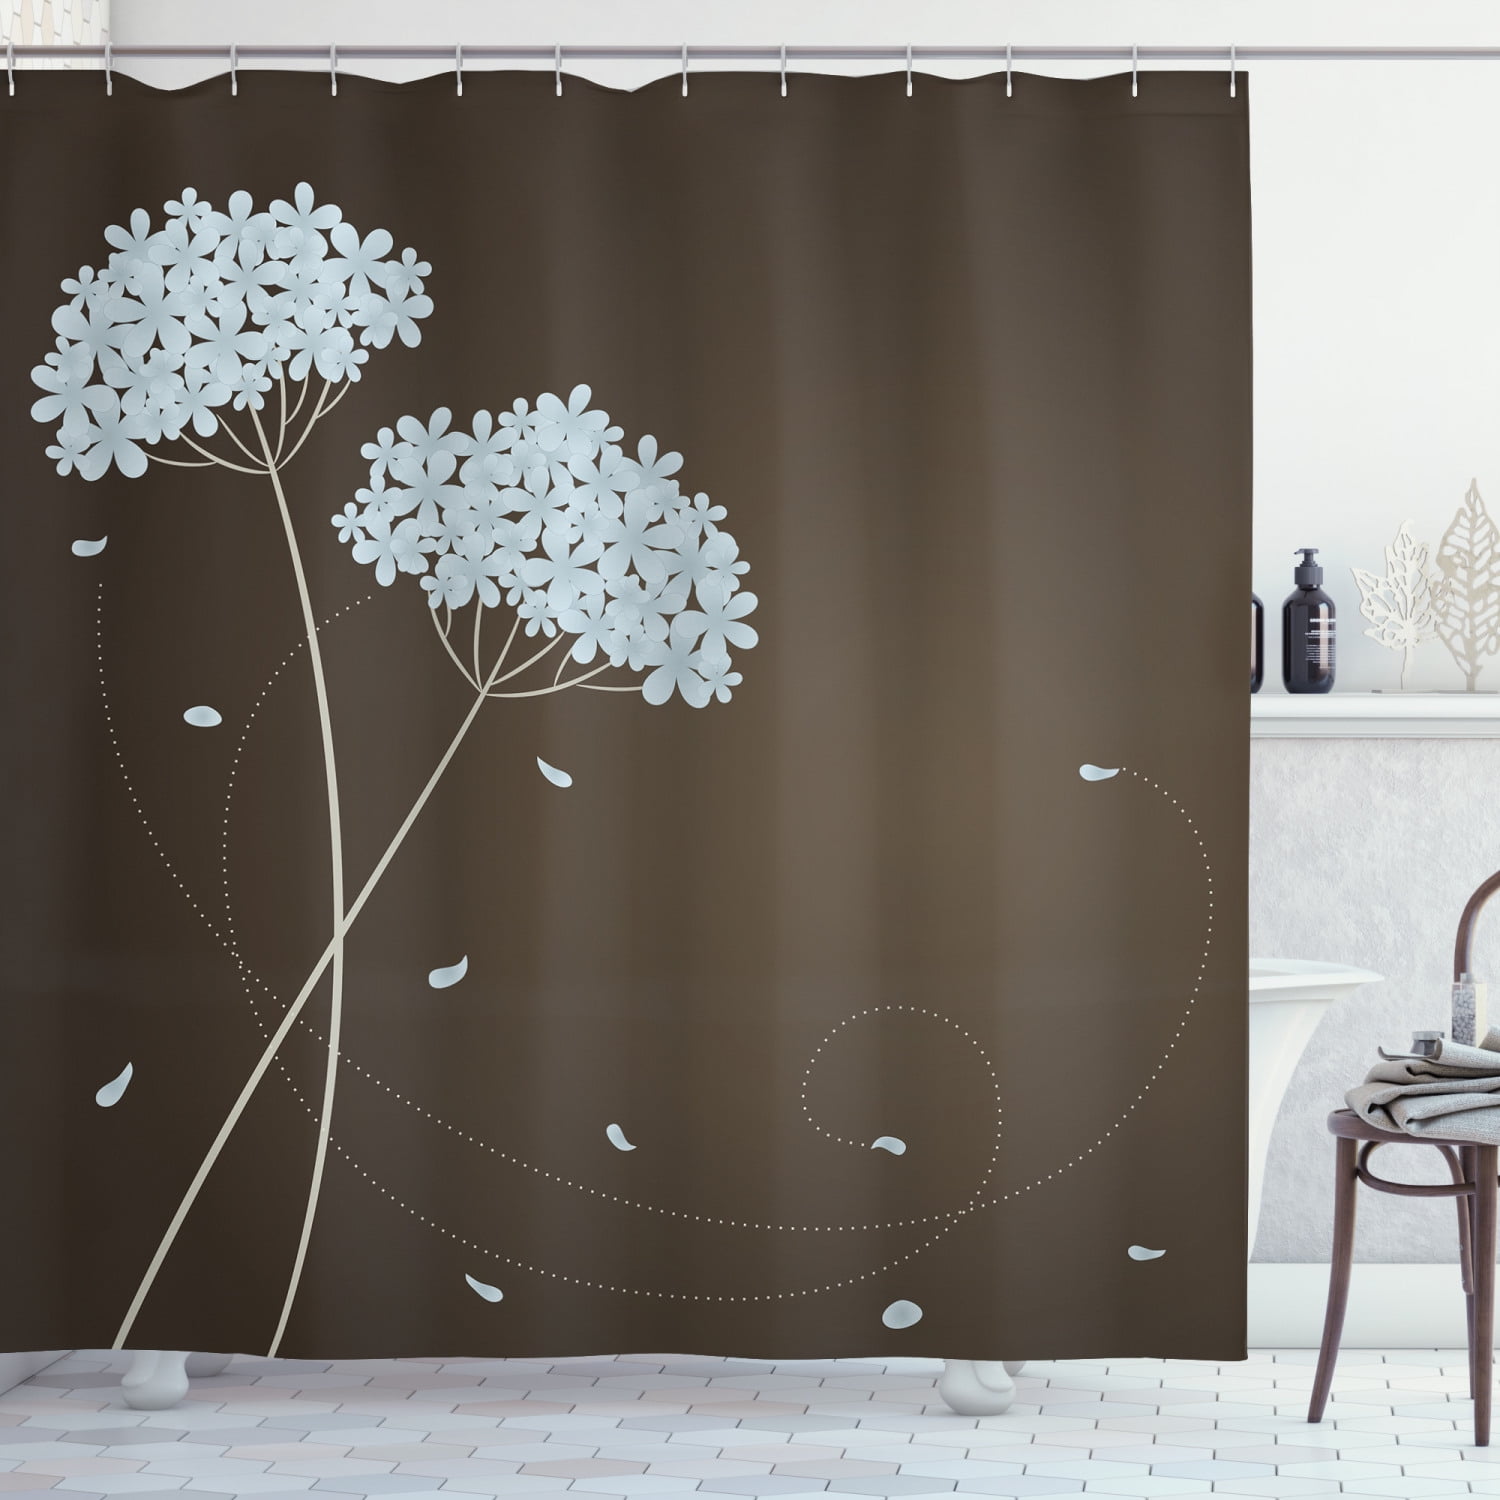 Autumn Forest Red Fallen Leaves Shower Curtain Sets for Bathroom Decor & Hooks 